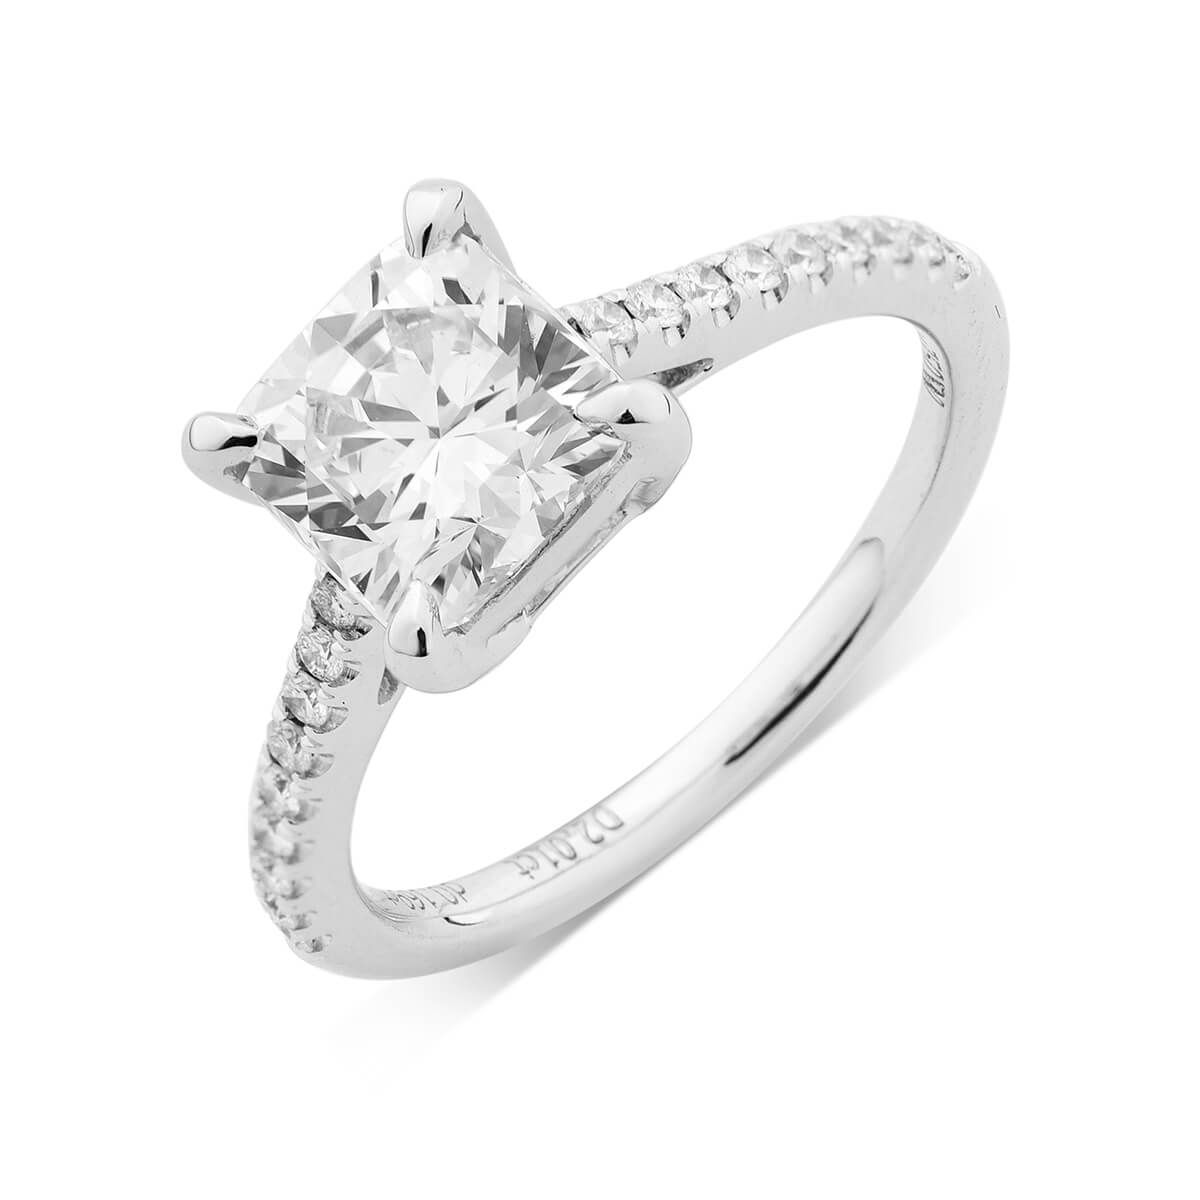  White Diamond Ring, 2.01 Ct. (2.18 Ct. TW), Cushion shape, HRD Certified, 180000073571